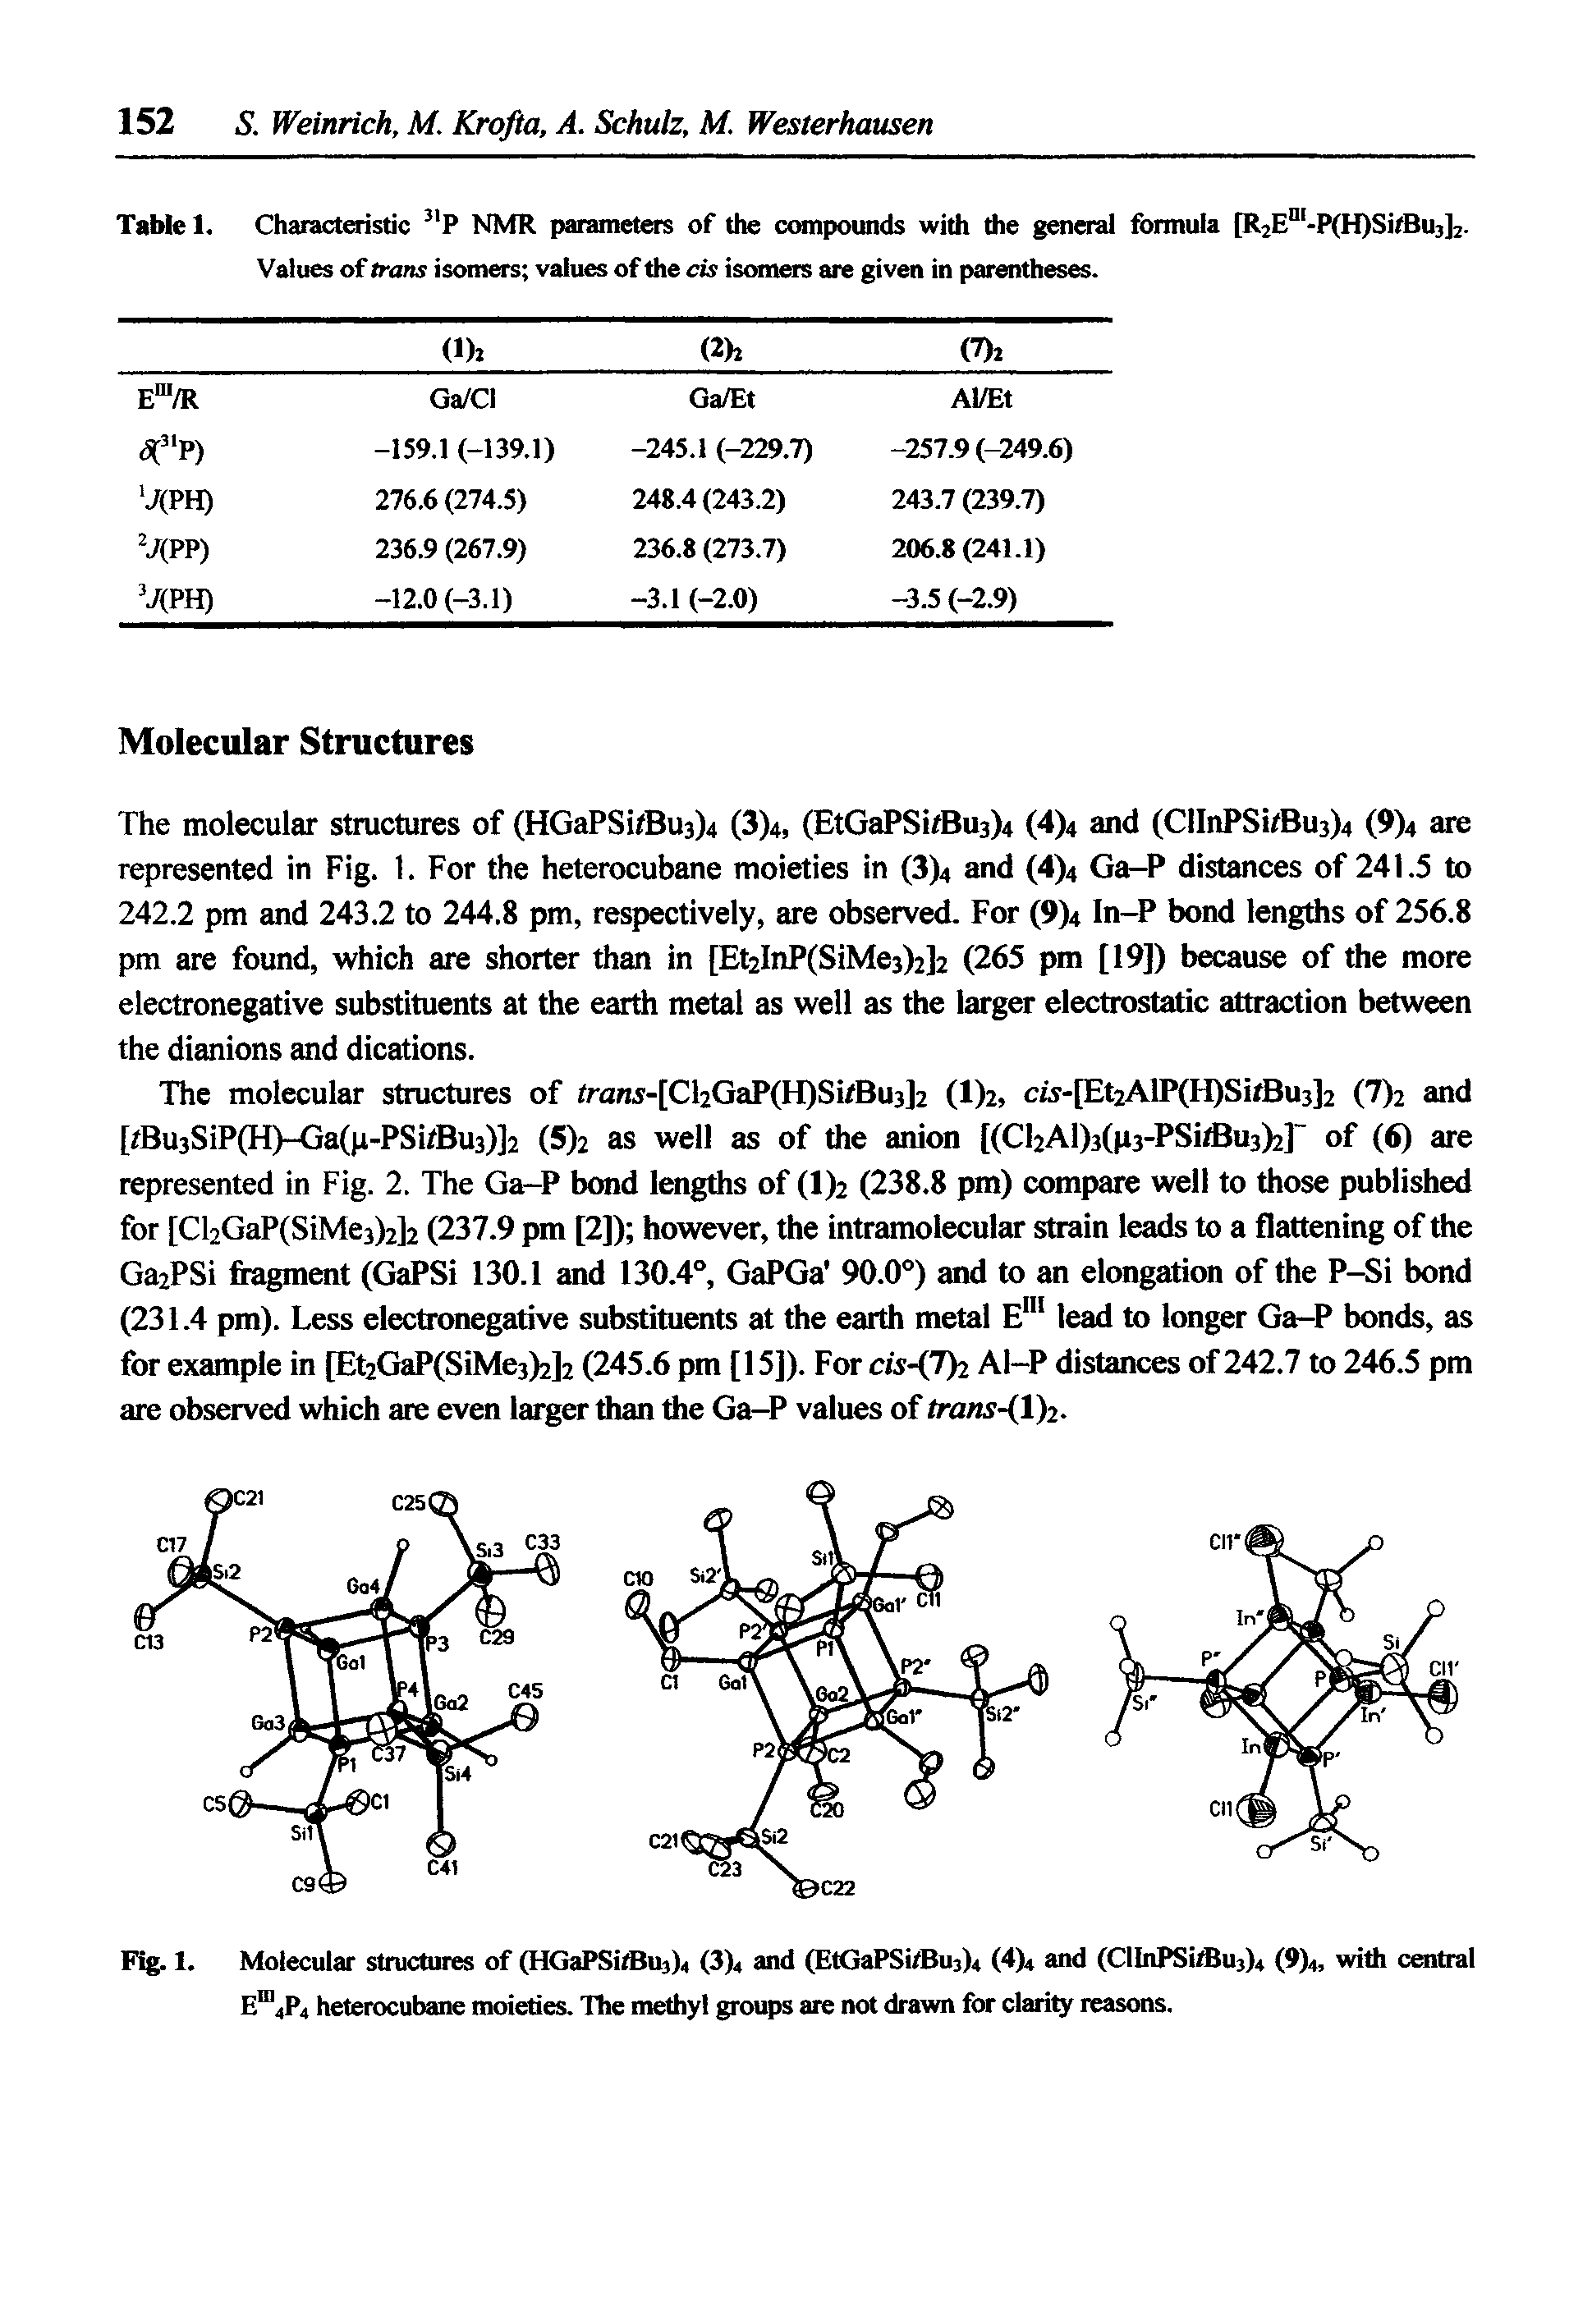 Tablet. Characteristic P NMR parameters of the compounds with the general formula [R2E "-P(H)SitBu3]2. Values of trans isomers values of the cis isomers are given in parentheses.